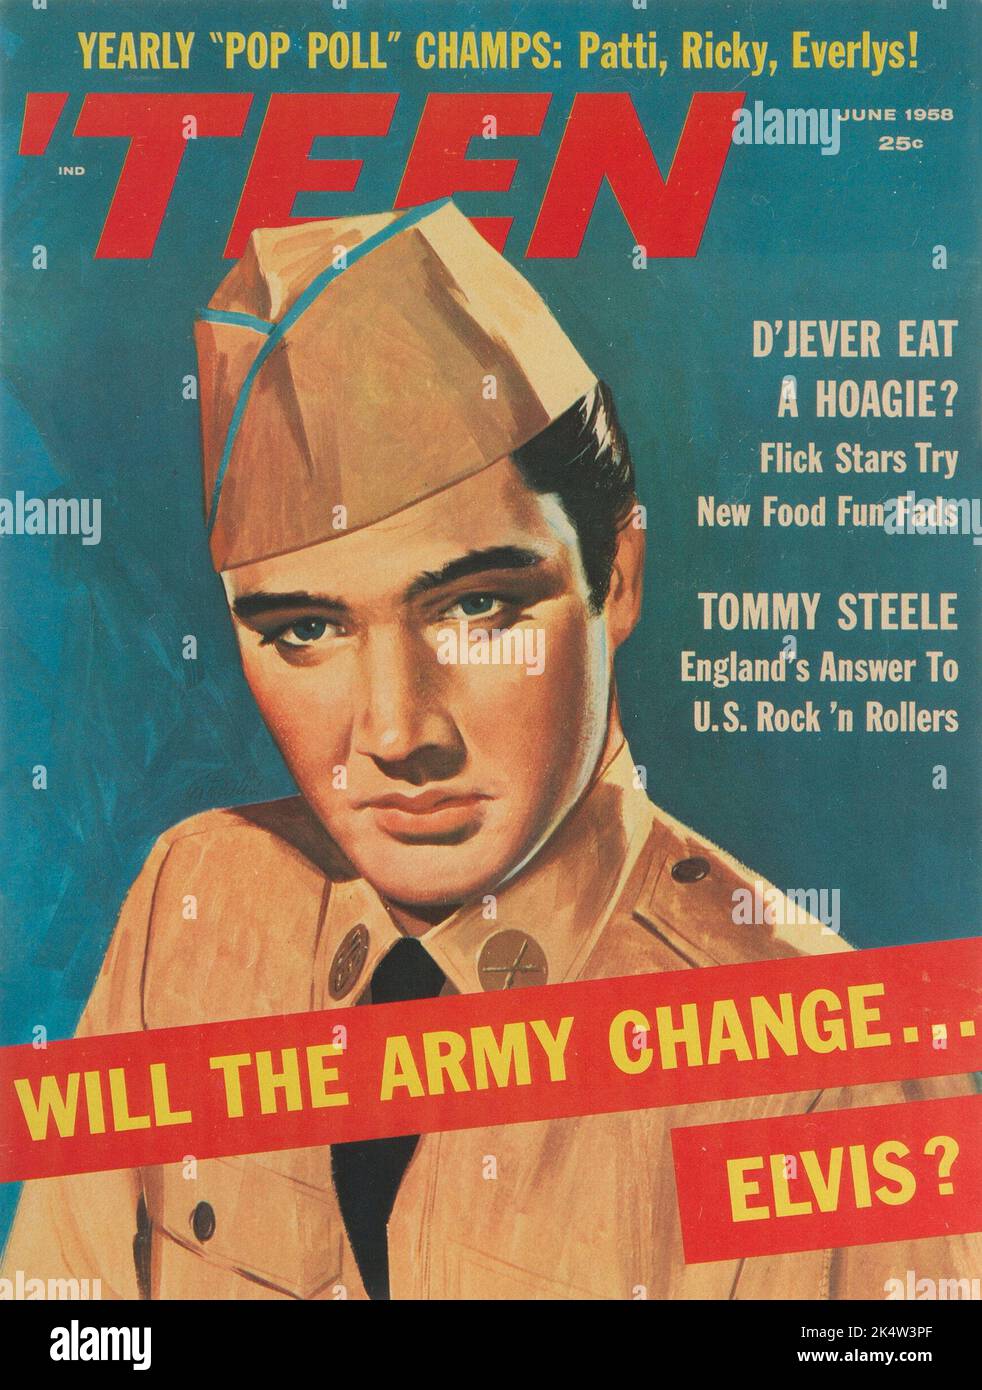 Teen Publications magazine cover, 1958 - Will the army change Elvis? Stock Photo